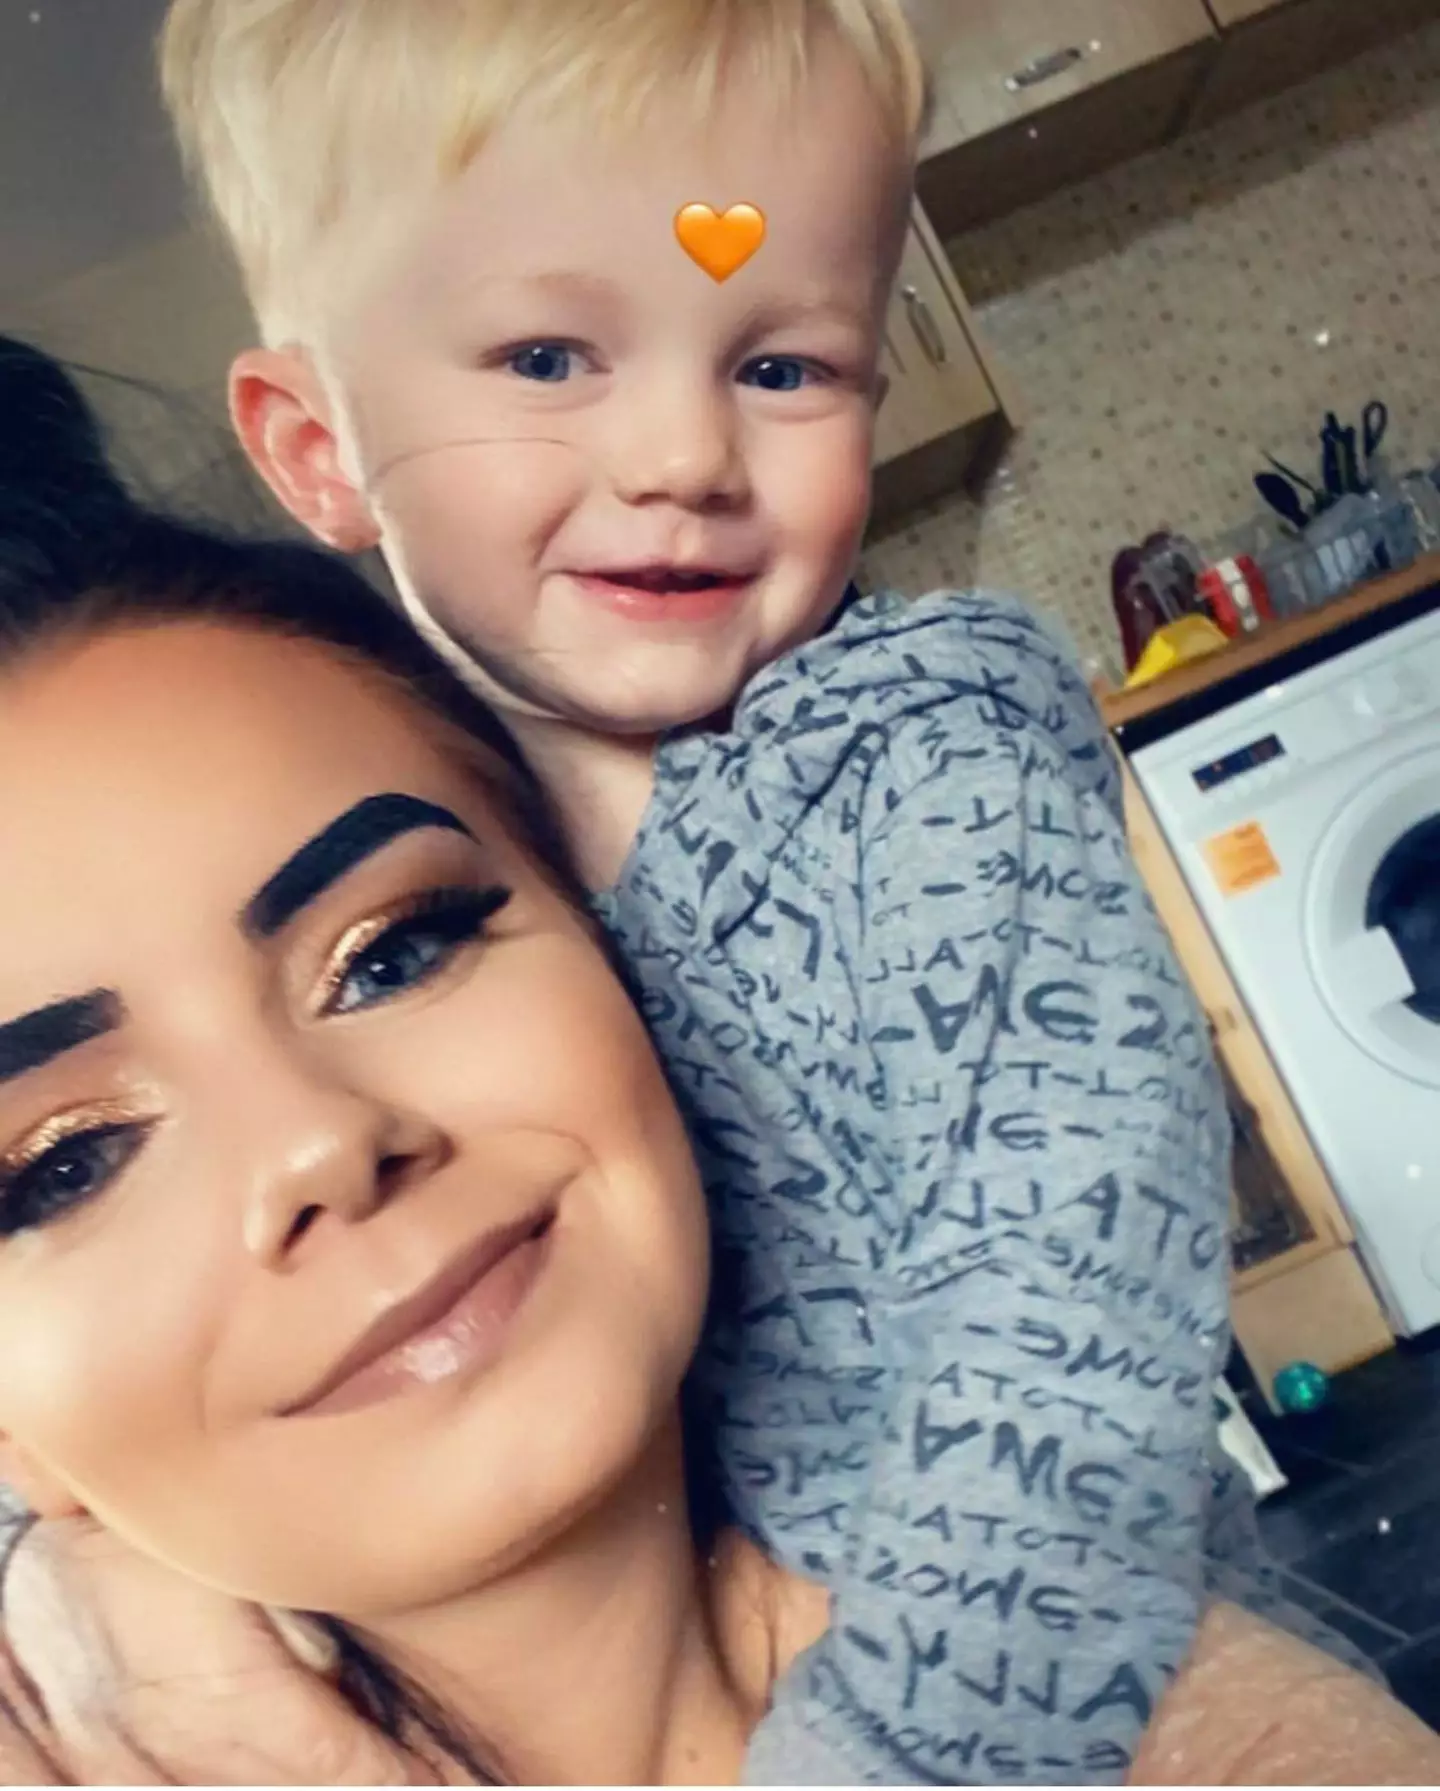 Sinead-Leah says her son woke up in the night screaming in agony (Caters News and Media)